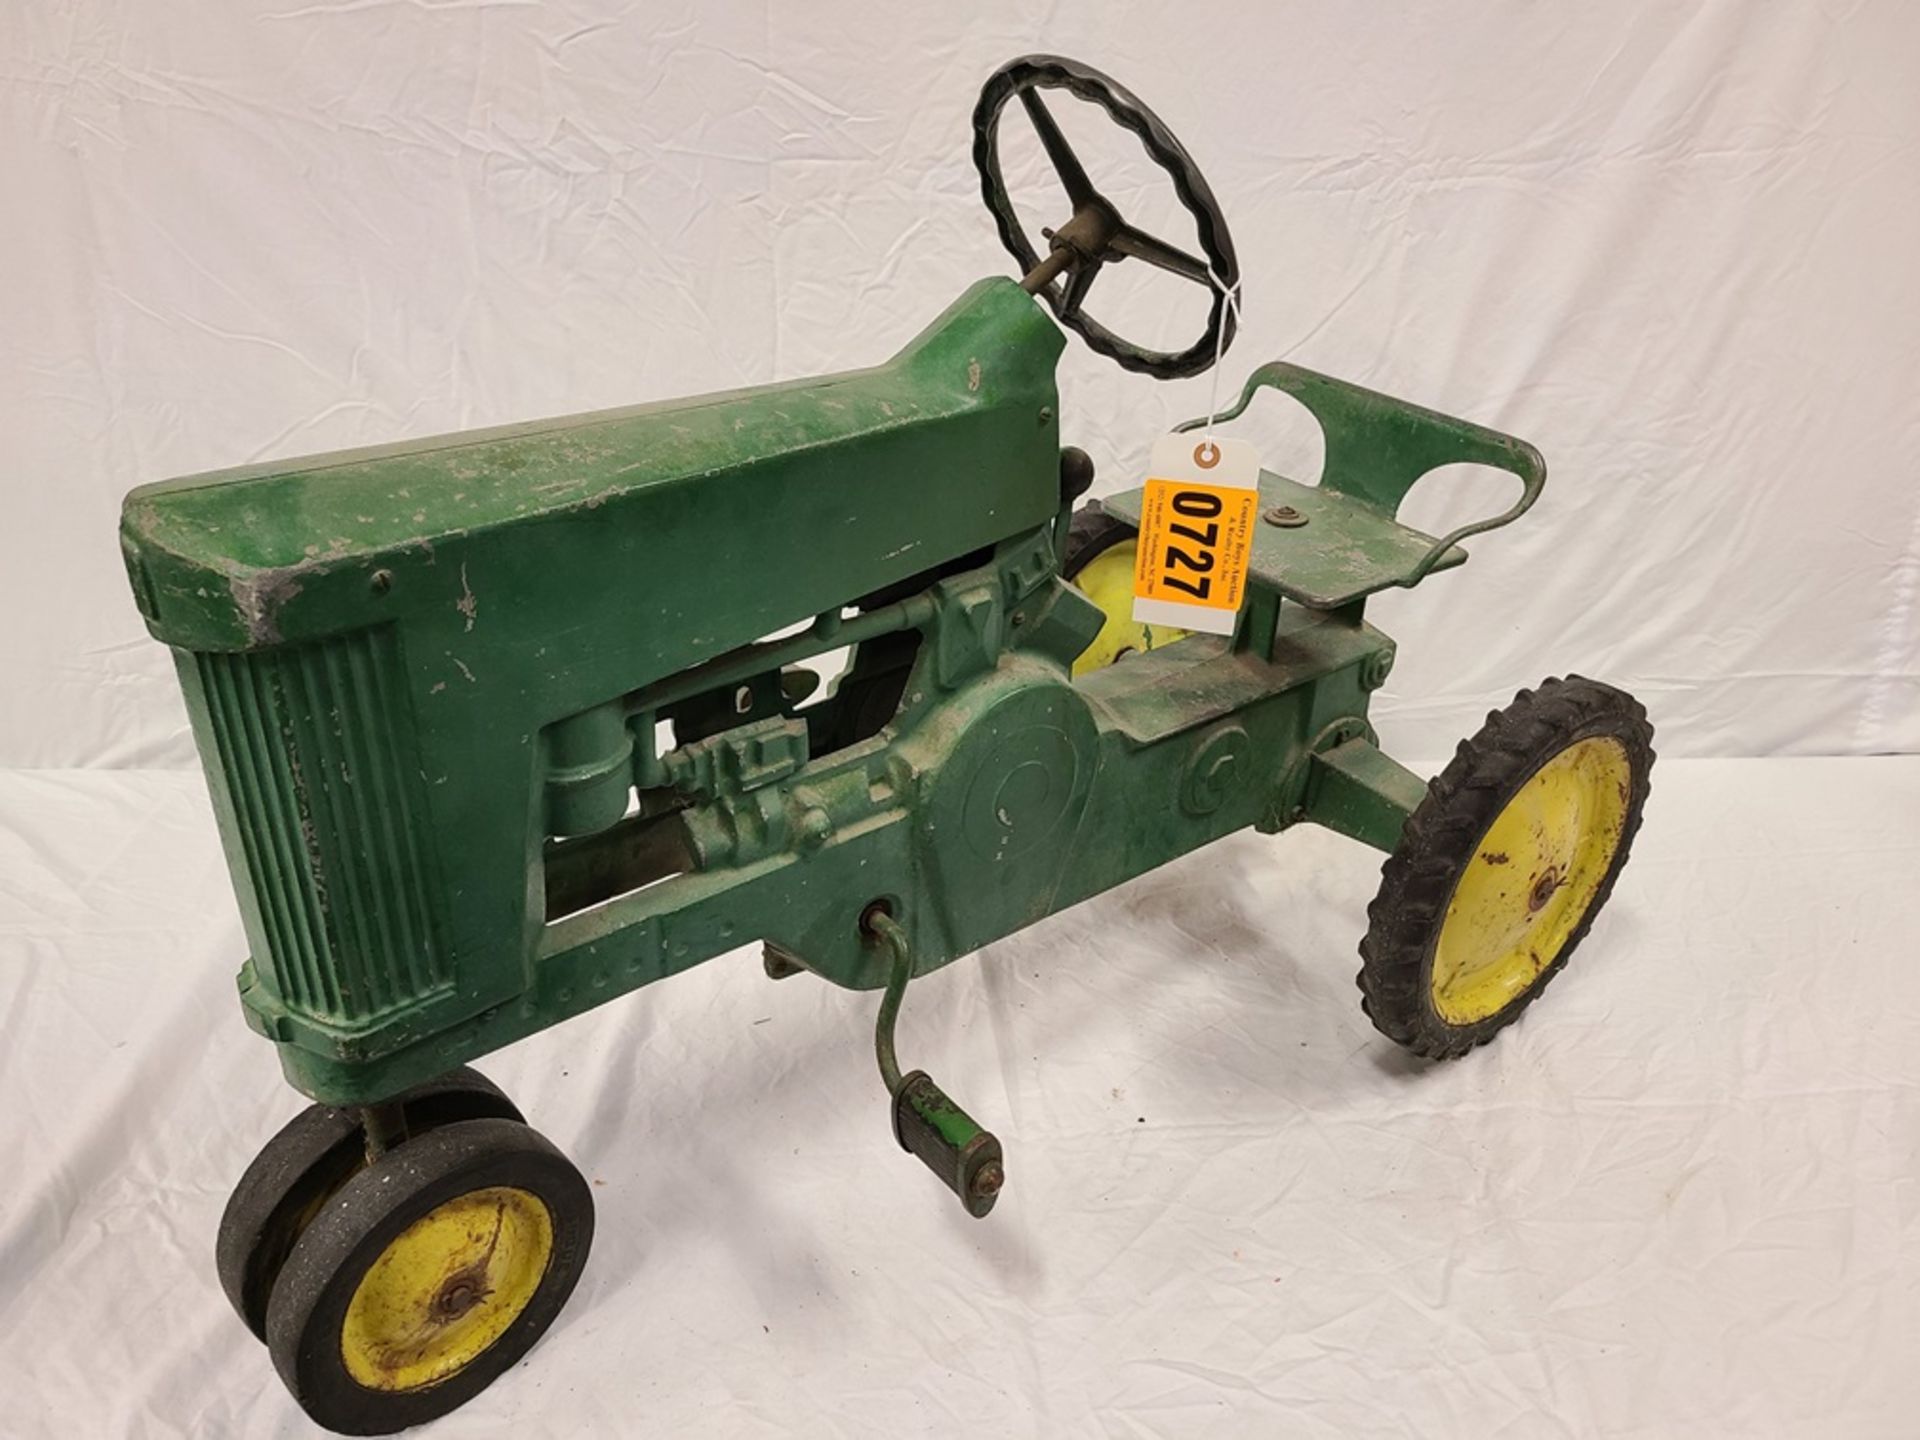 green and yellow "Tractor" tricycle pedal tractor